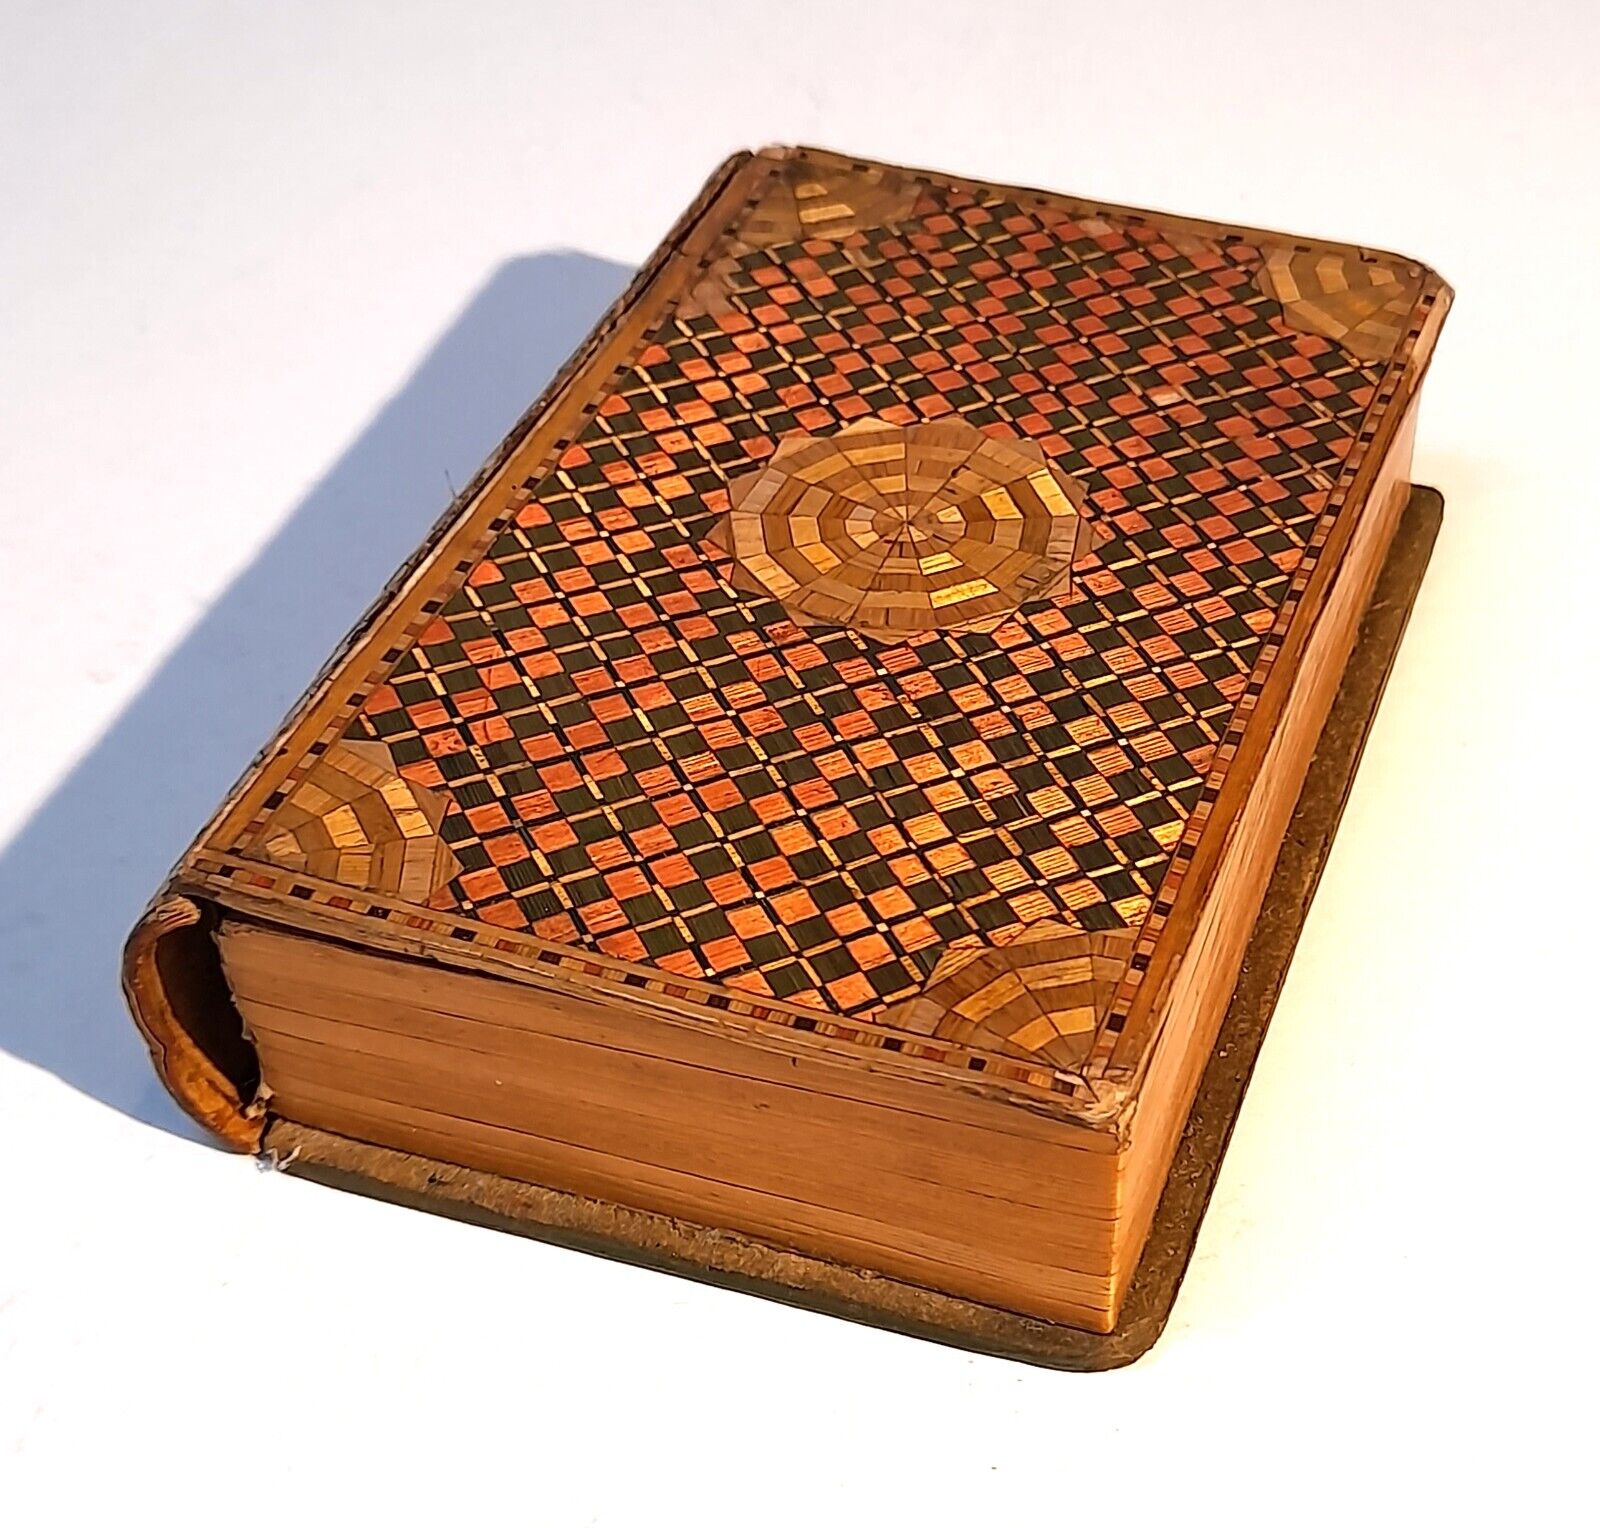 18th century French Straw-work parquetry sewing box.